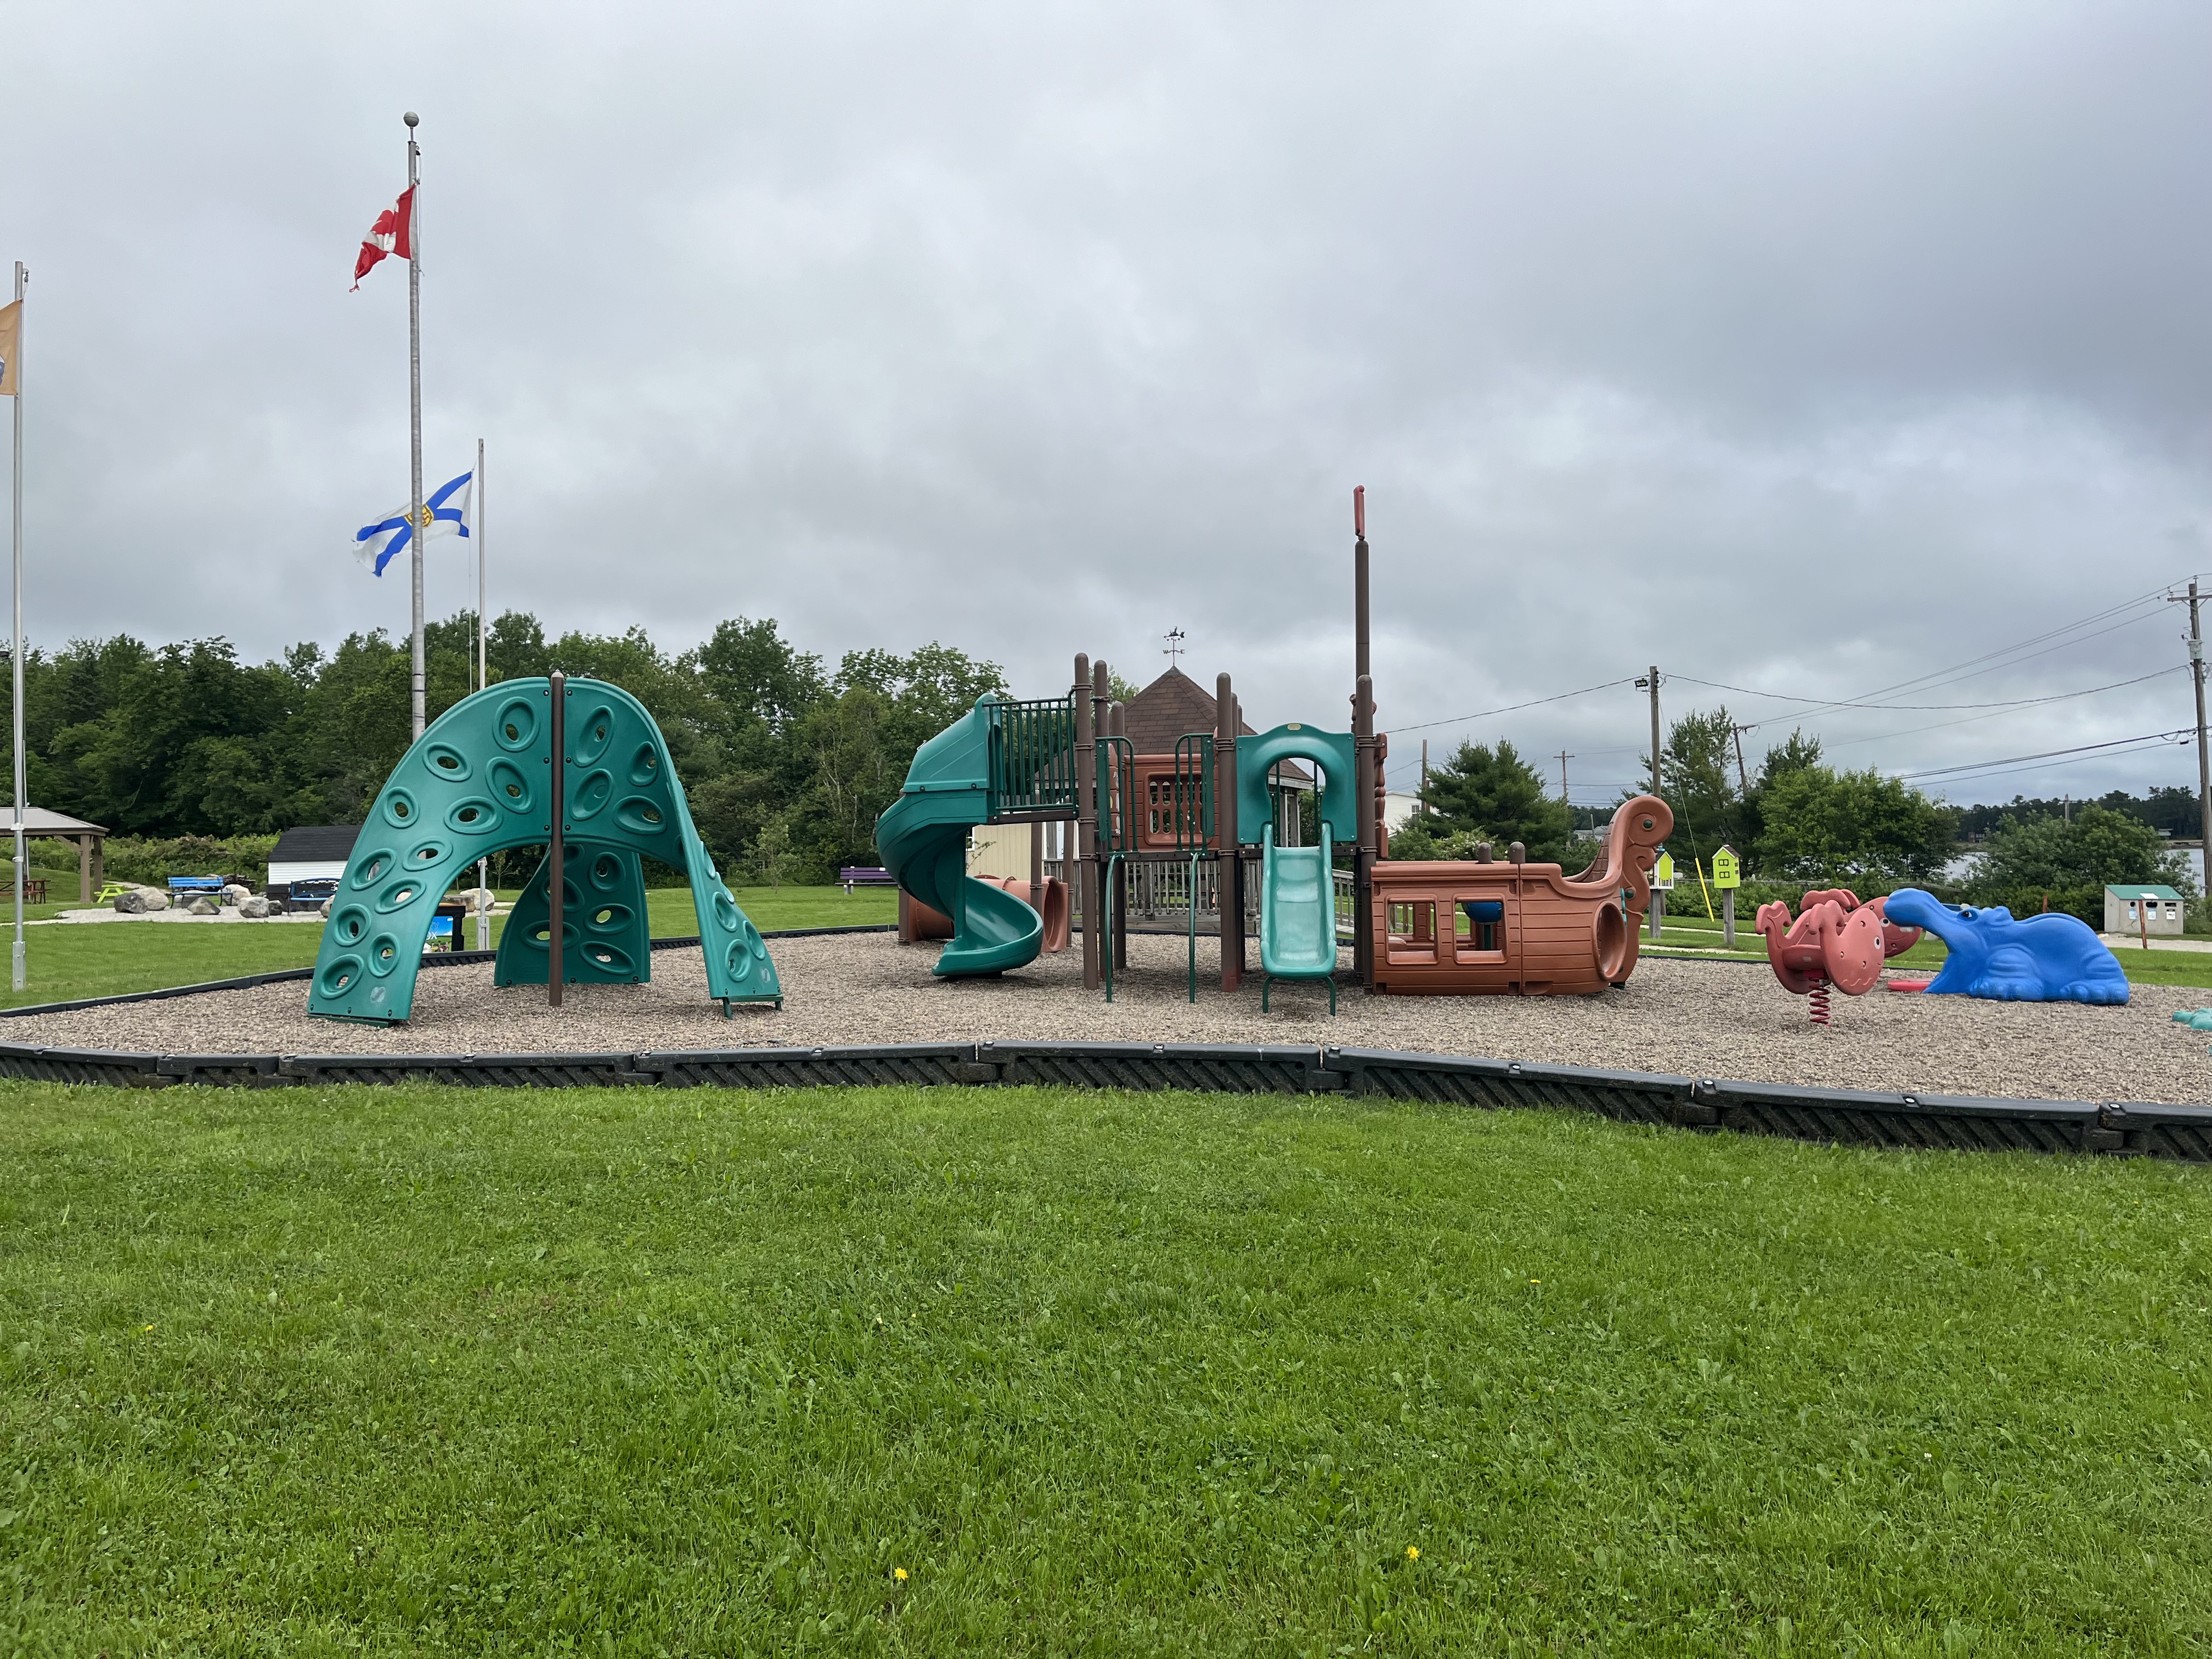 Pirate Ship Park with pirate themed play equipment on sand surrounded by grass. Canada and Nova Scotia flags on flag poles.